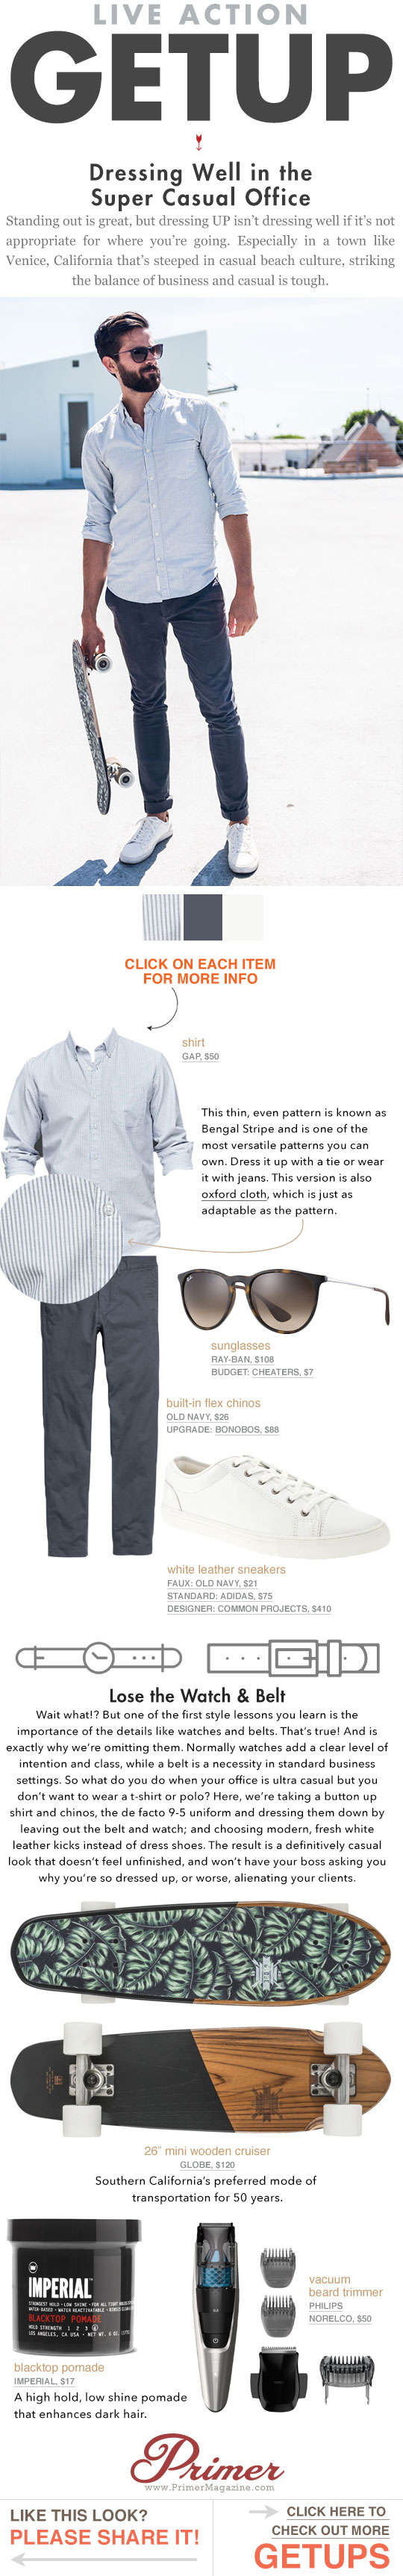 The Getup: Dressing Well in the Super Casual Office   Men's Style